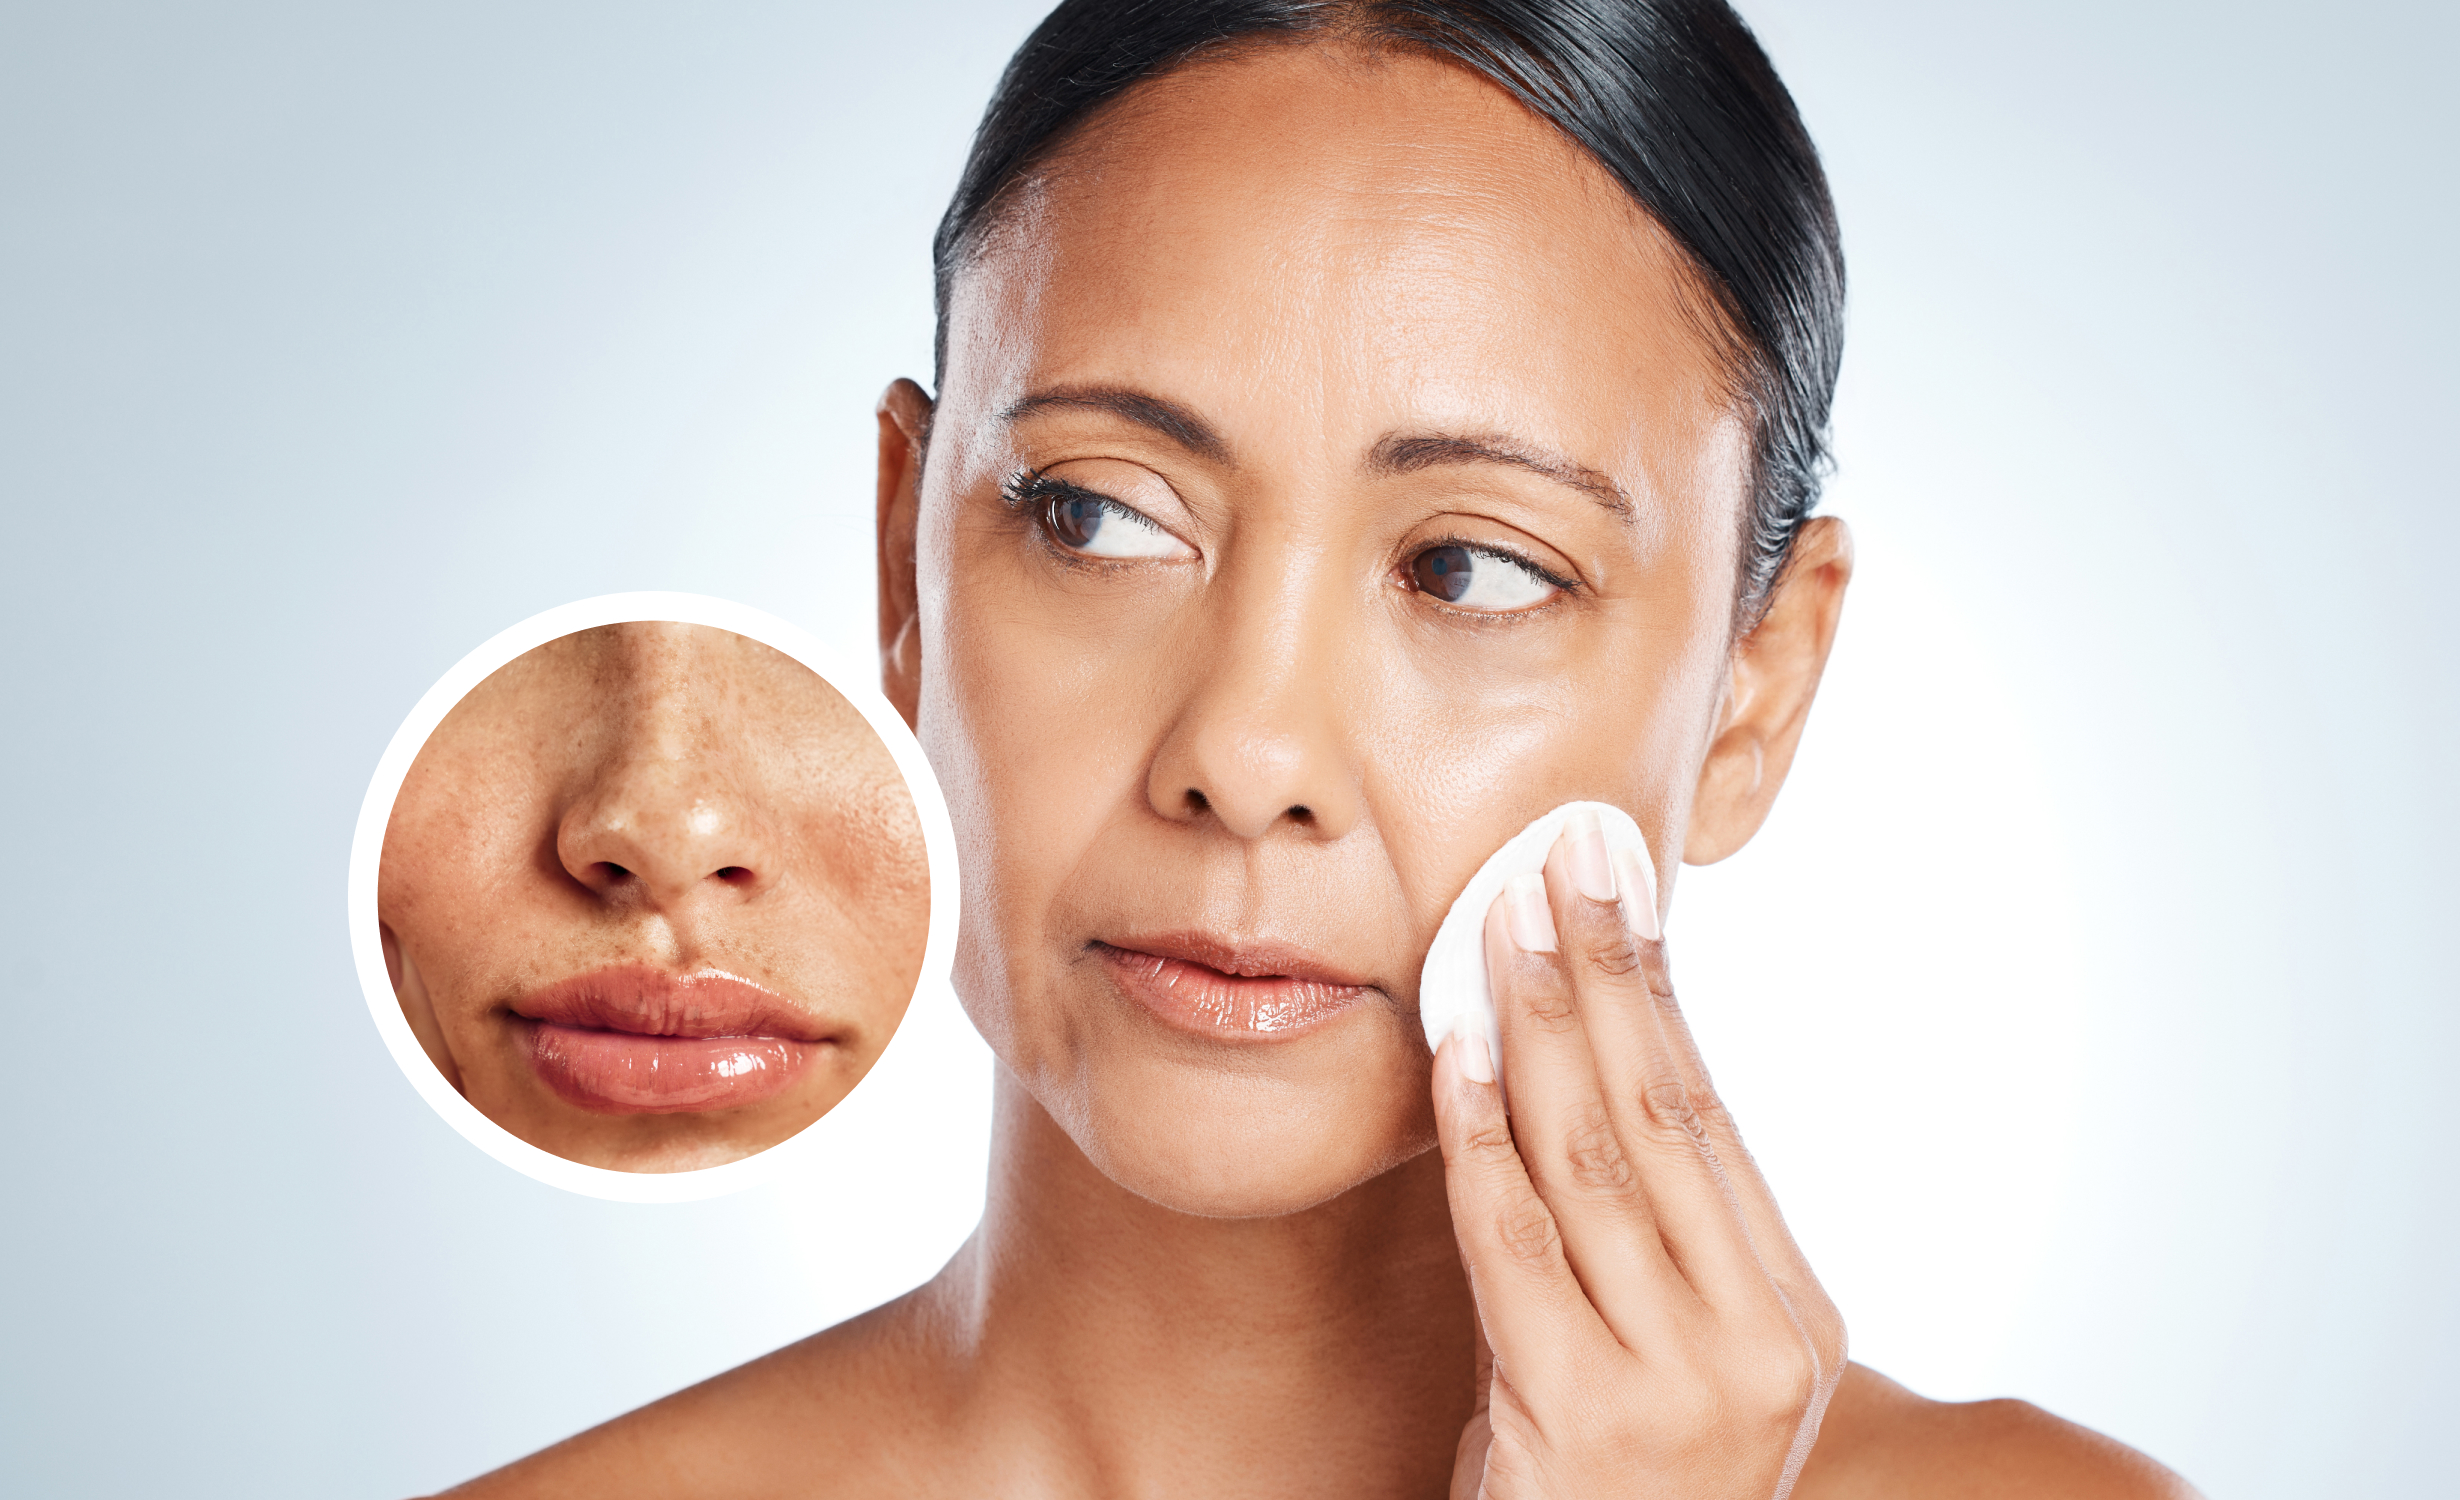 A woman with an oily skin condition gently dabs a cotton pad on her face. An inset magnifies a section of her skin, highlighting excess oil and pH imbalance issues.